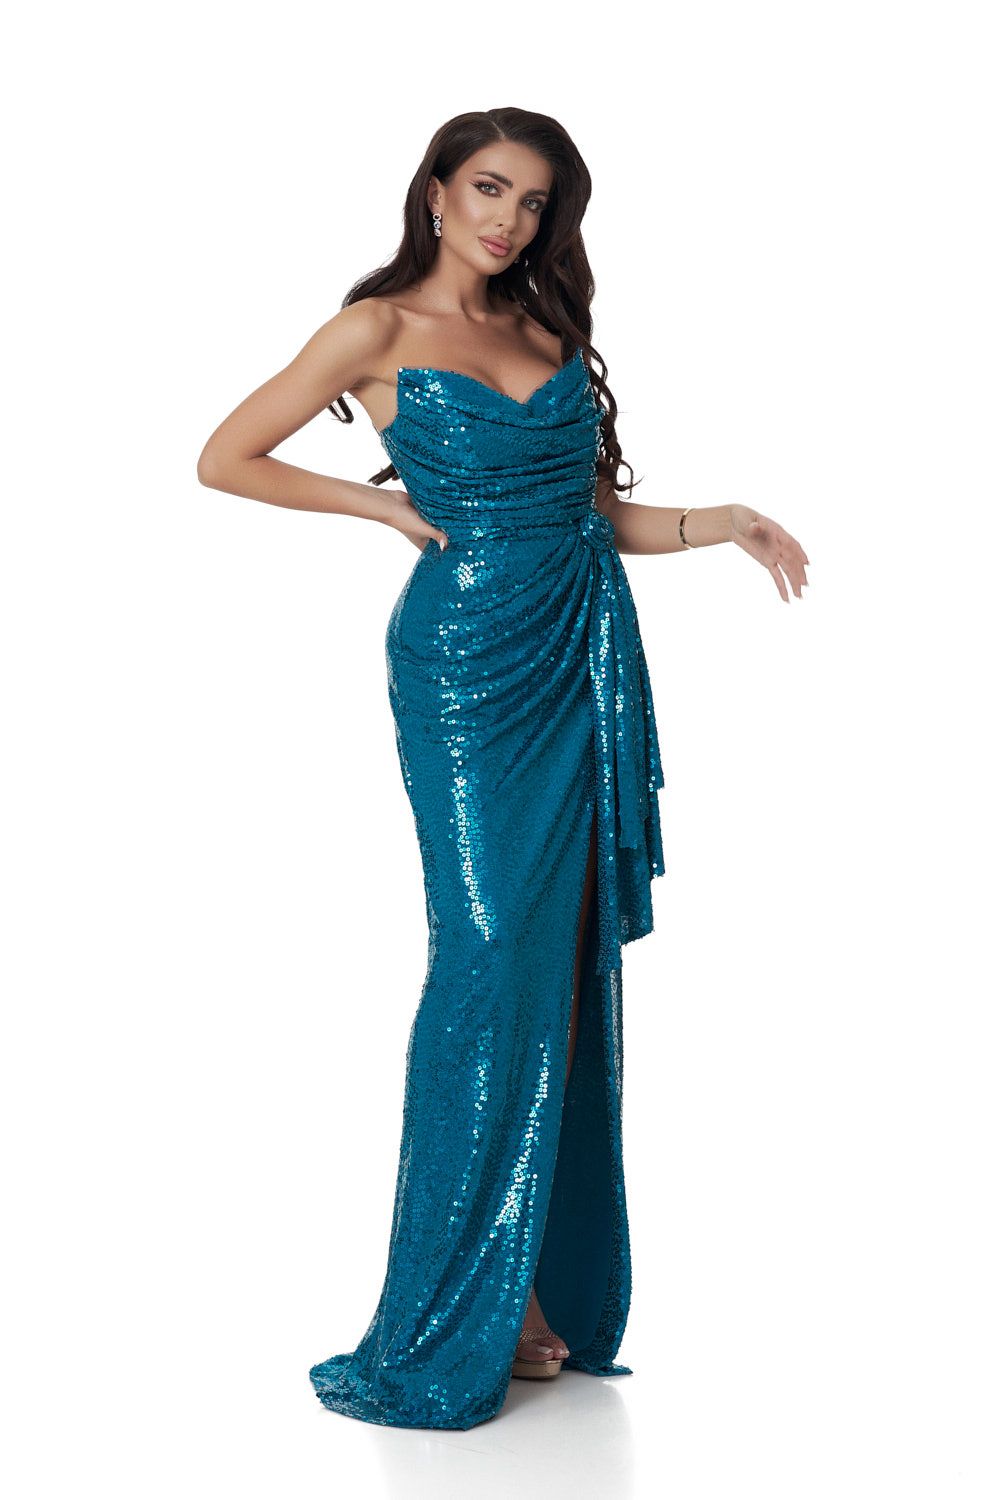 Turquoise sequin long dress for women by Nicomede Bogas